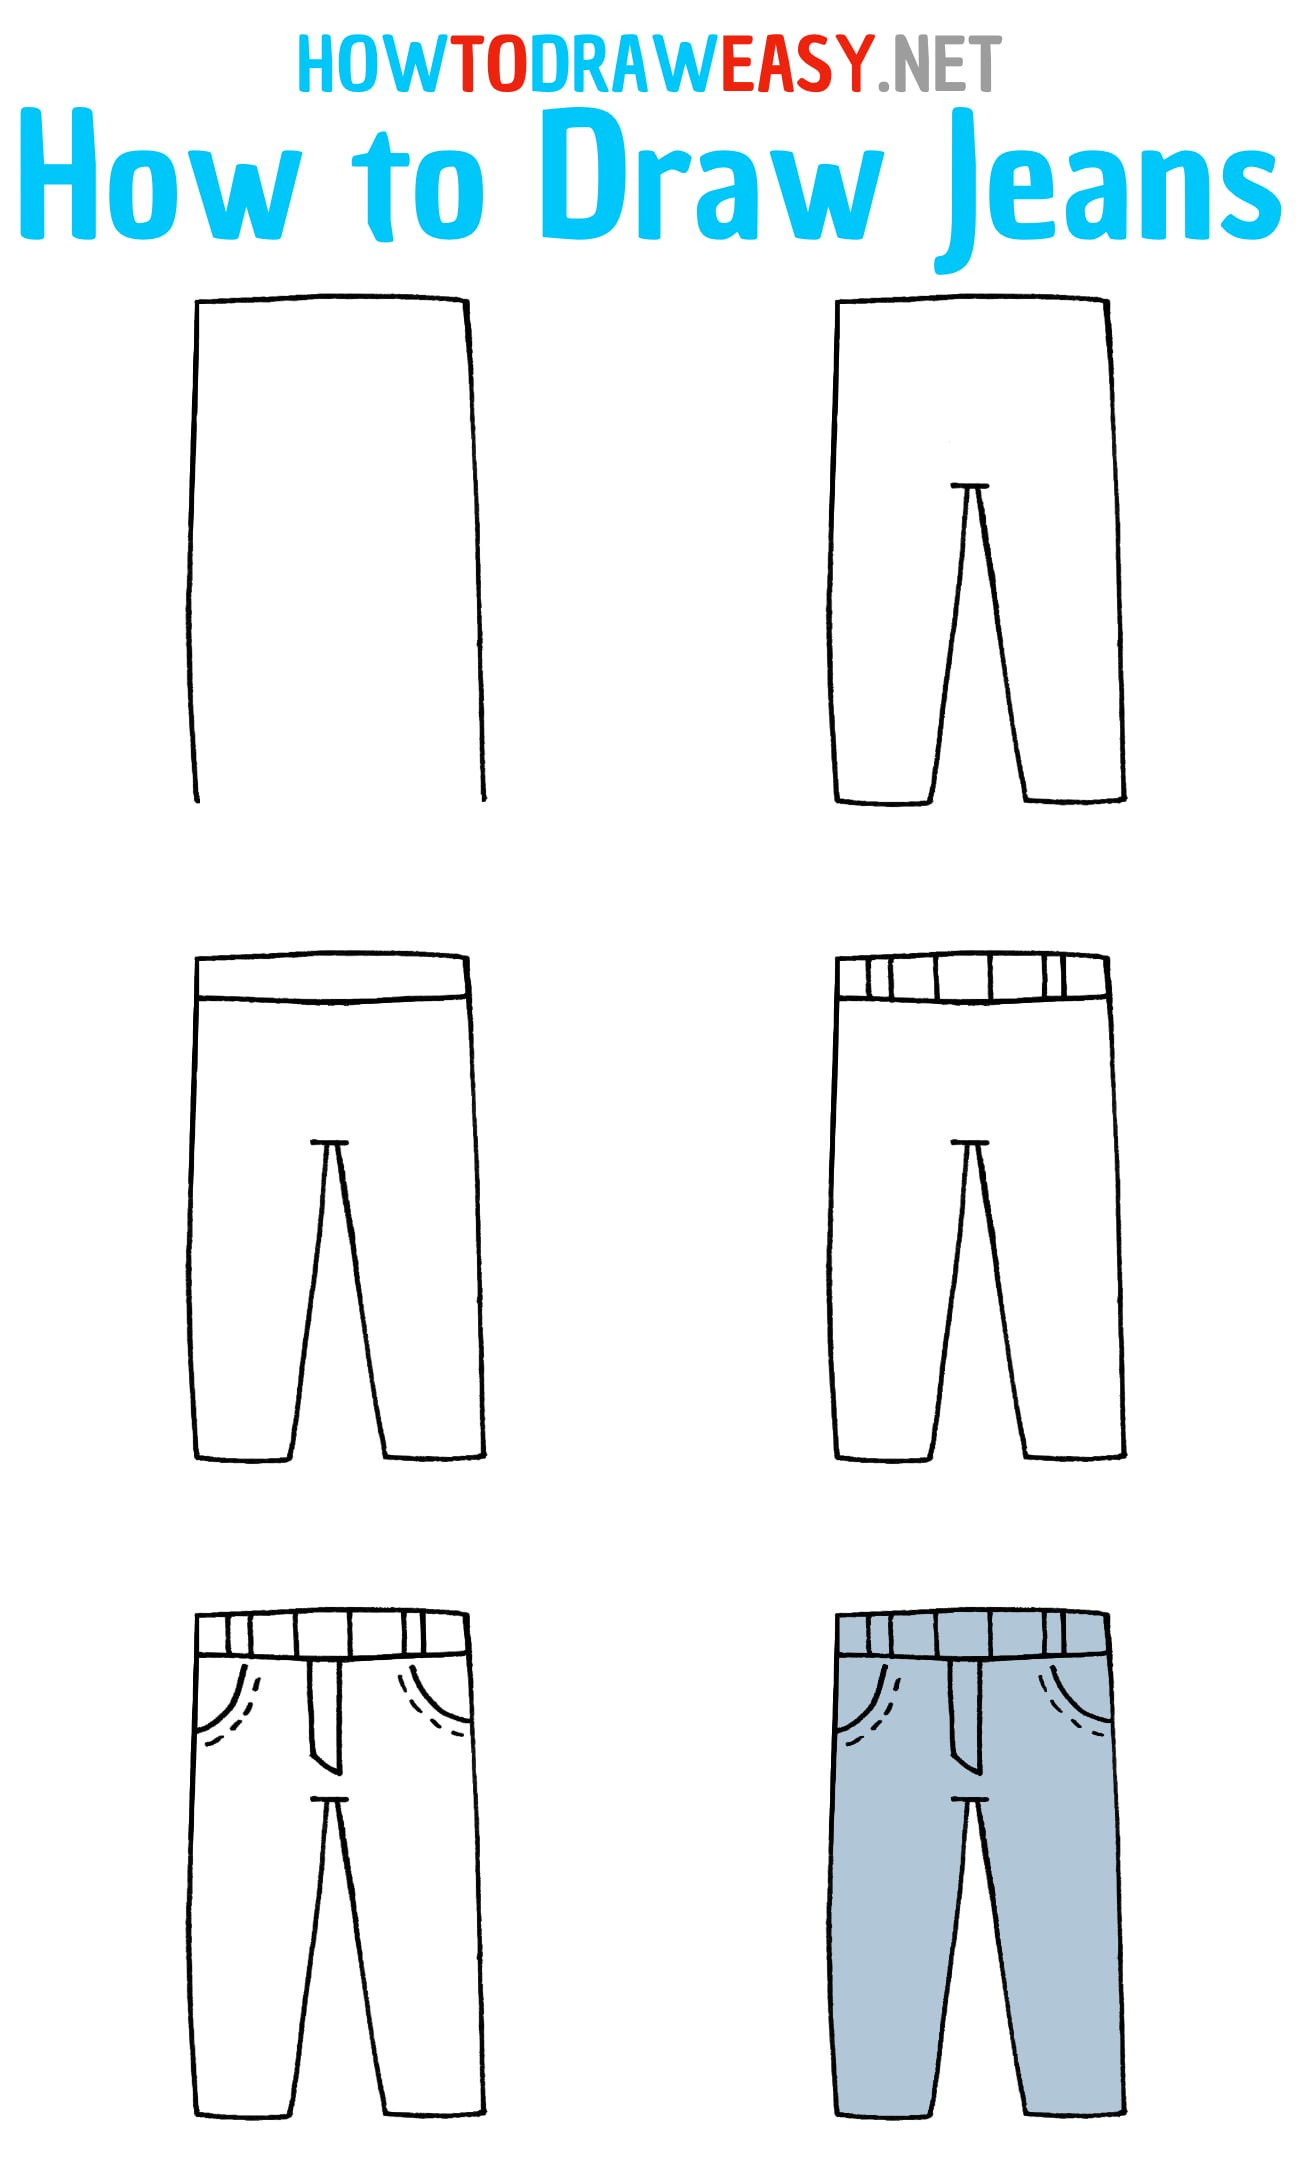 How to Draw Jeans Step by Step